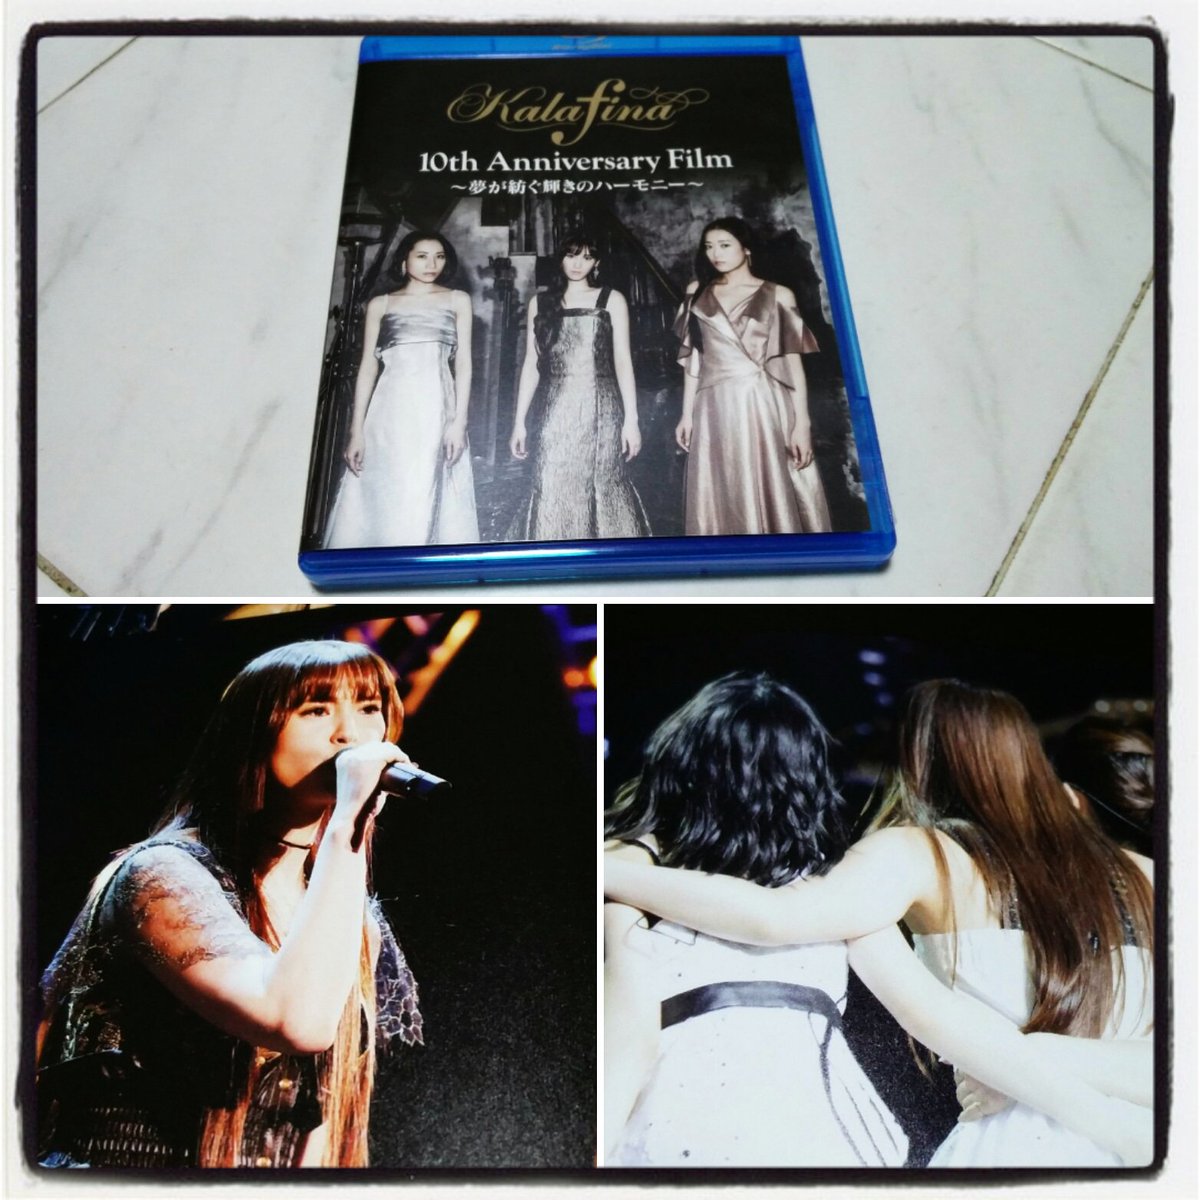 Sharonapple My Kalafina 10th Anniversary Film Has Arrived Too The Booklet Is Chock Full Of Photos Of The Trio Together It Actually Makes Me Sad With This I Think